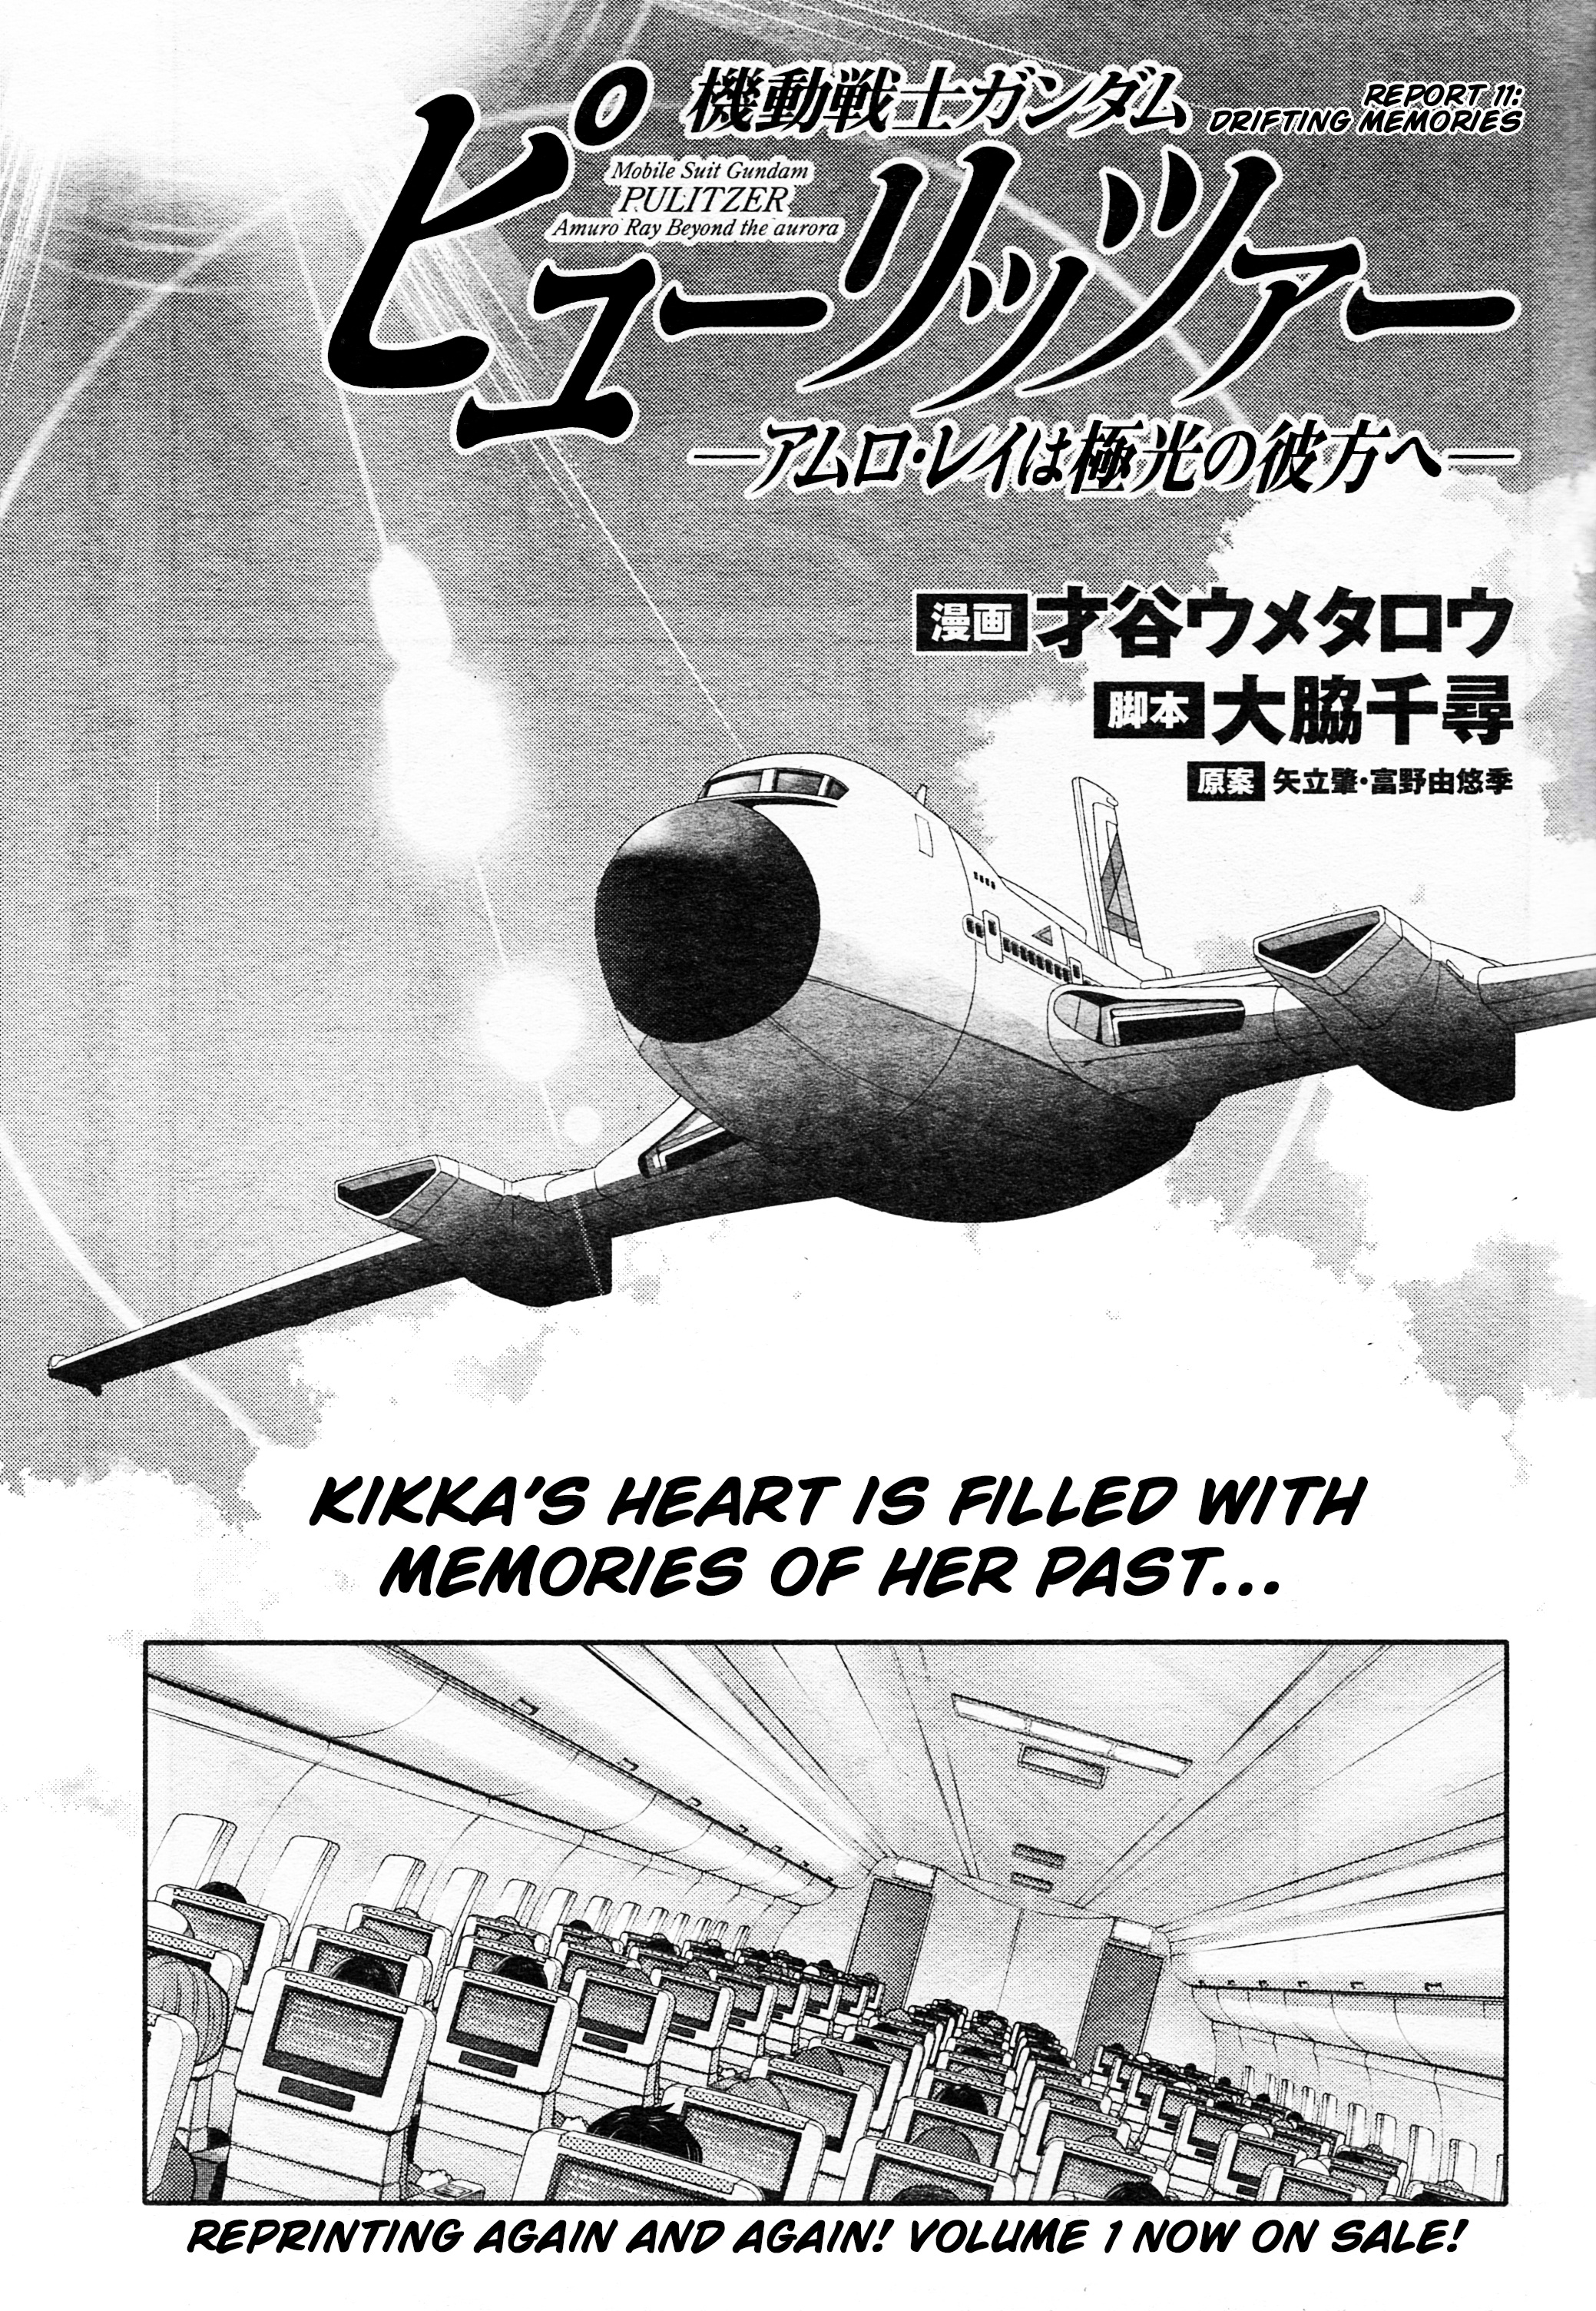 Mobile Suit Gundam Pulitzer - Amuro Ray Beyond The Aurora Vol.2 Chapter 11: Report 11: Drifting Memories - Picture 1